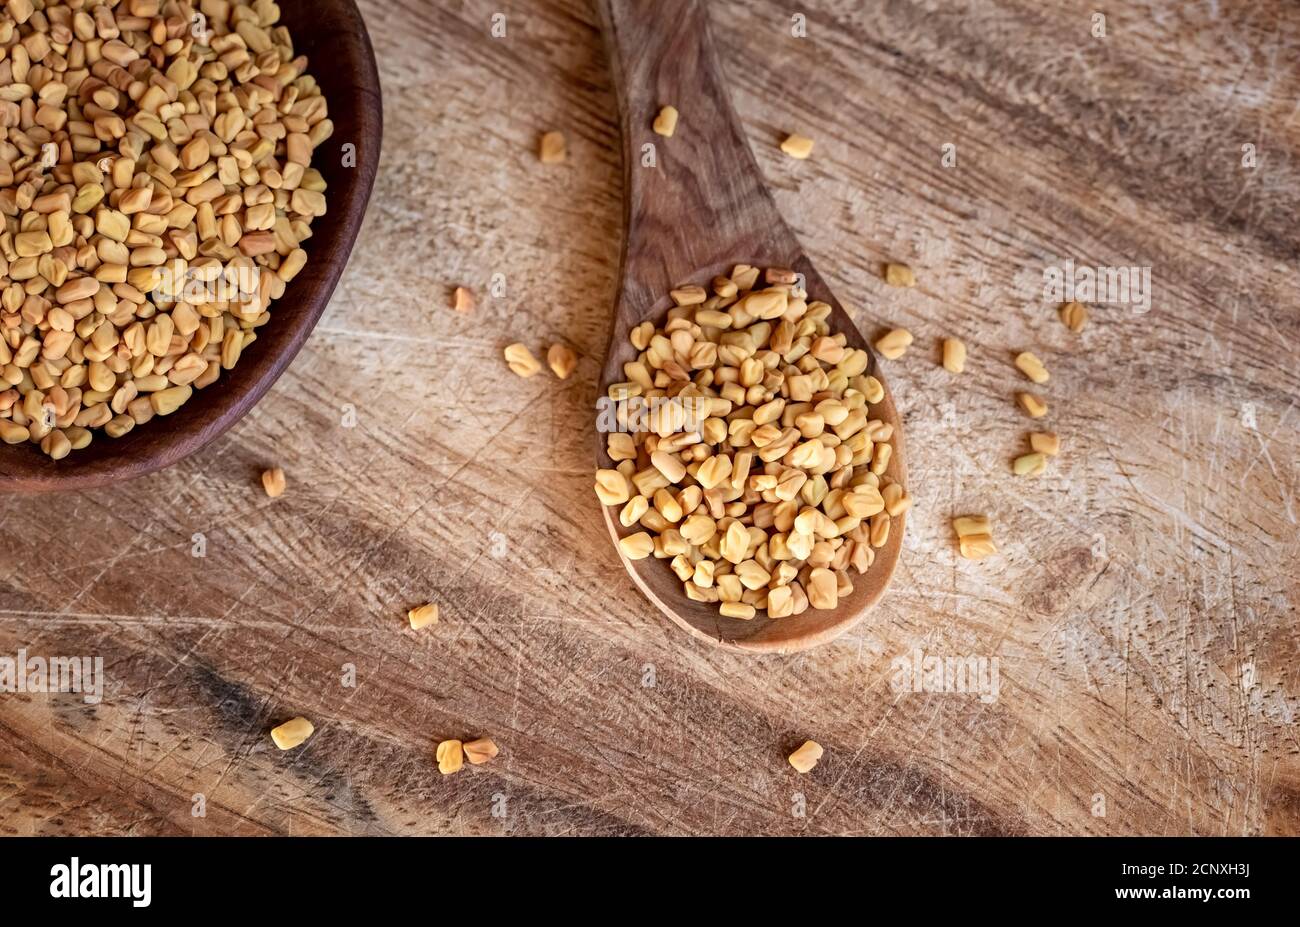 Fenugreek seeds on a spoon, top view. Stock Photo